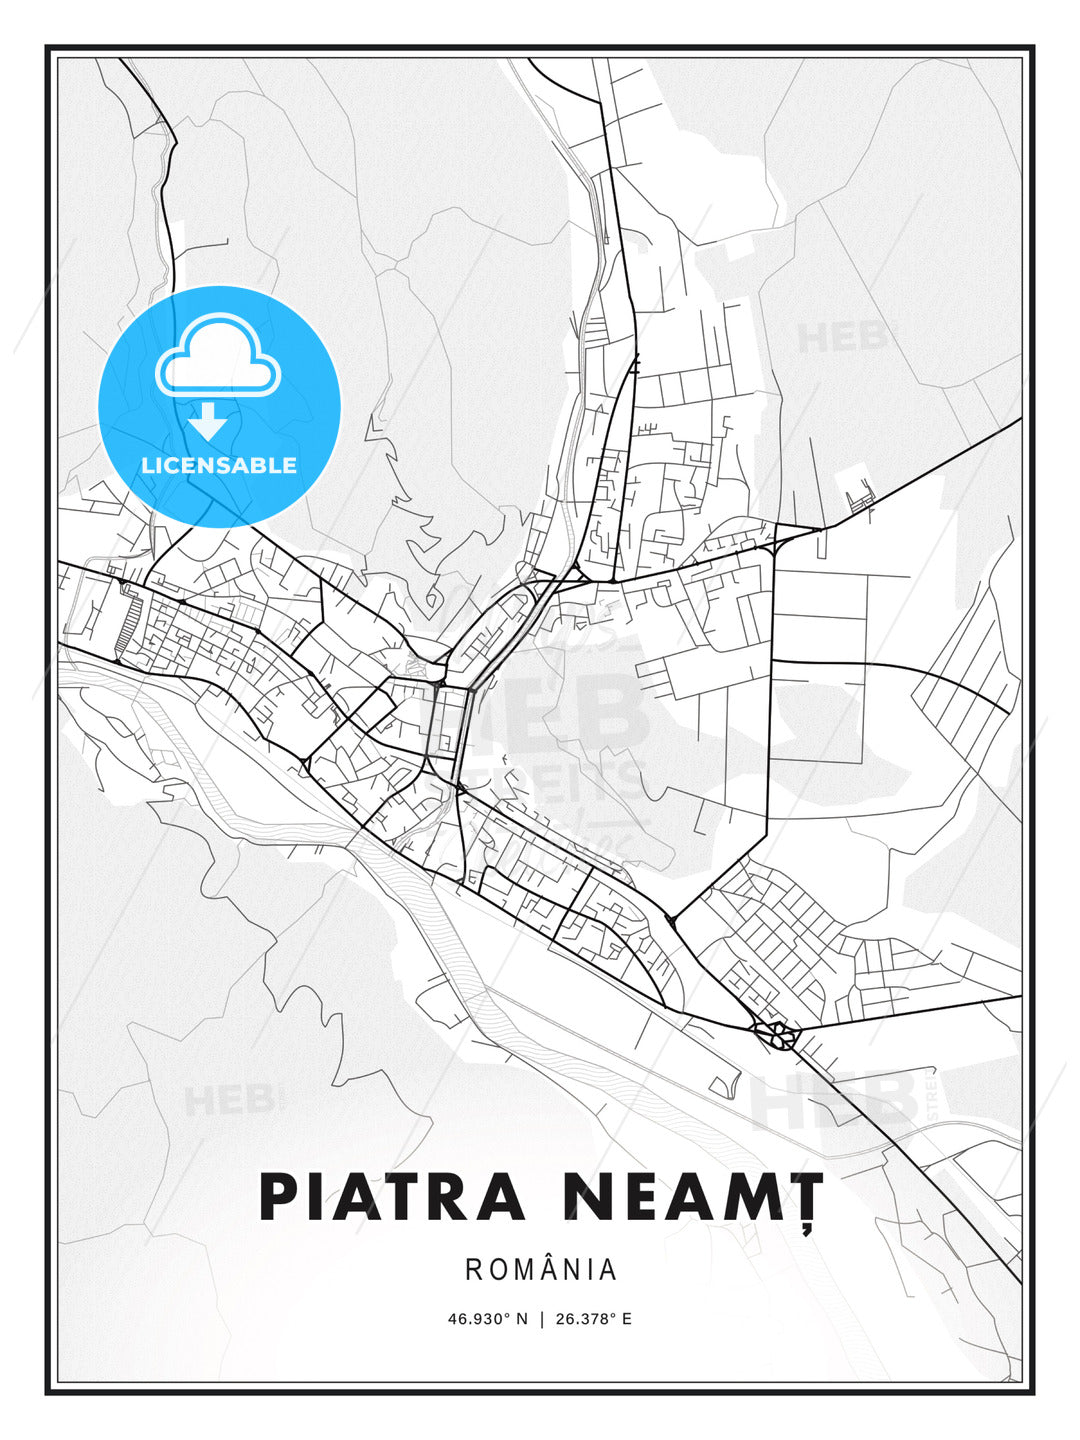 Piatra Neamț, Romania, Modern Print Template in Various Formats - HEBSTREITS Sketches